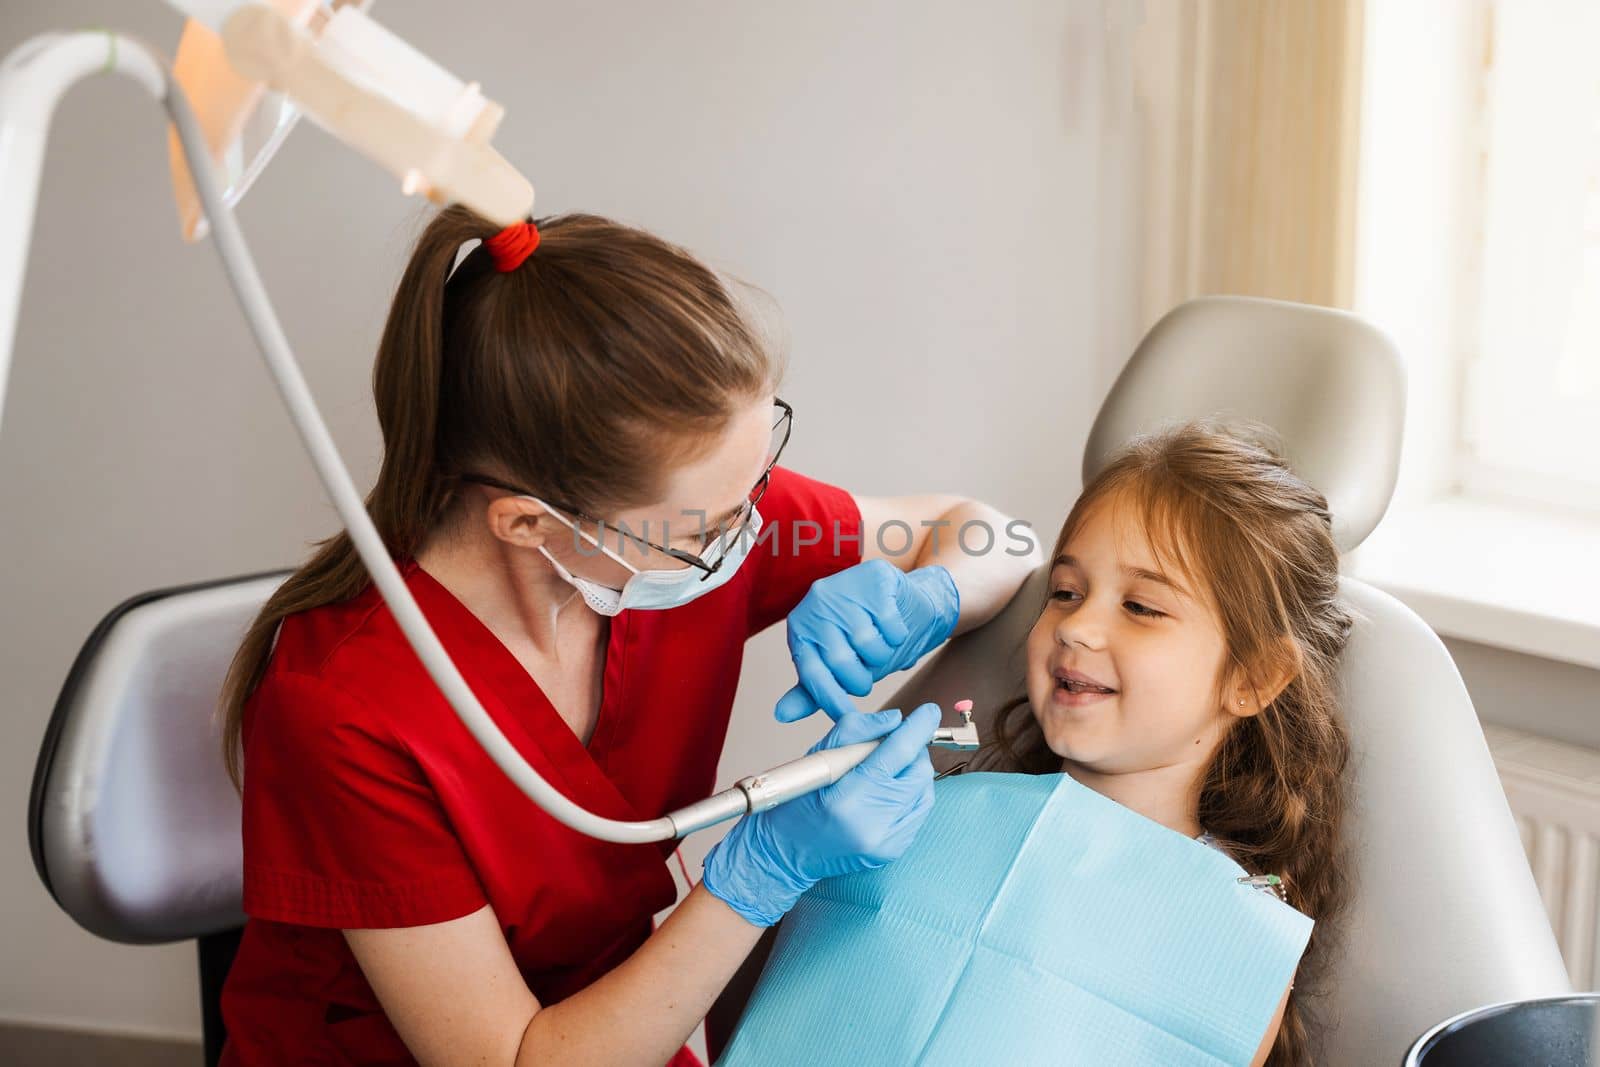 Professional hygiene for teeth of child in dentistry. Professional teeth cleaning for child girl. Pediatric dentist examines and consults kid patient in dentistry. by Rabizo